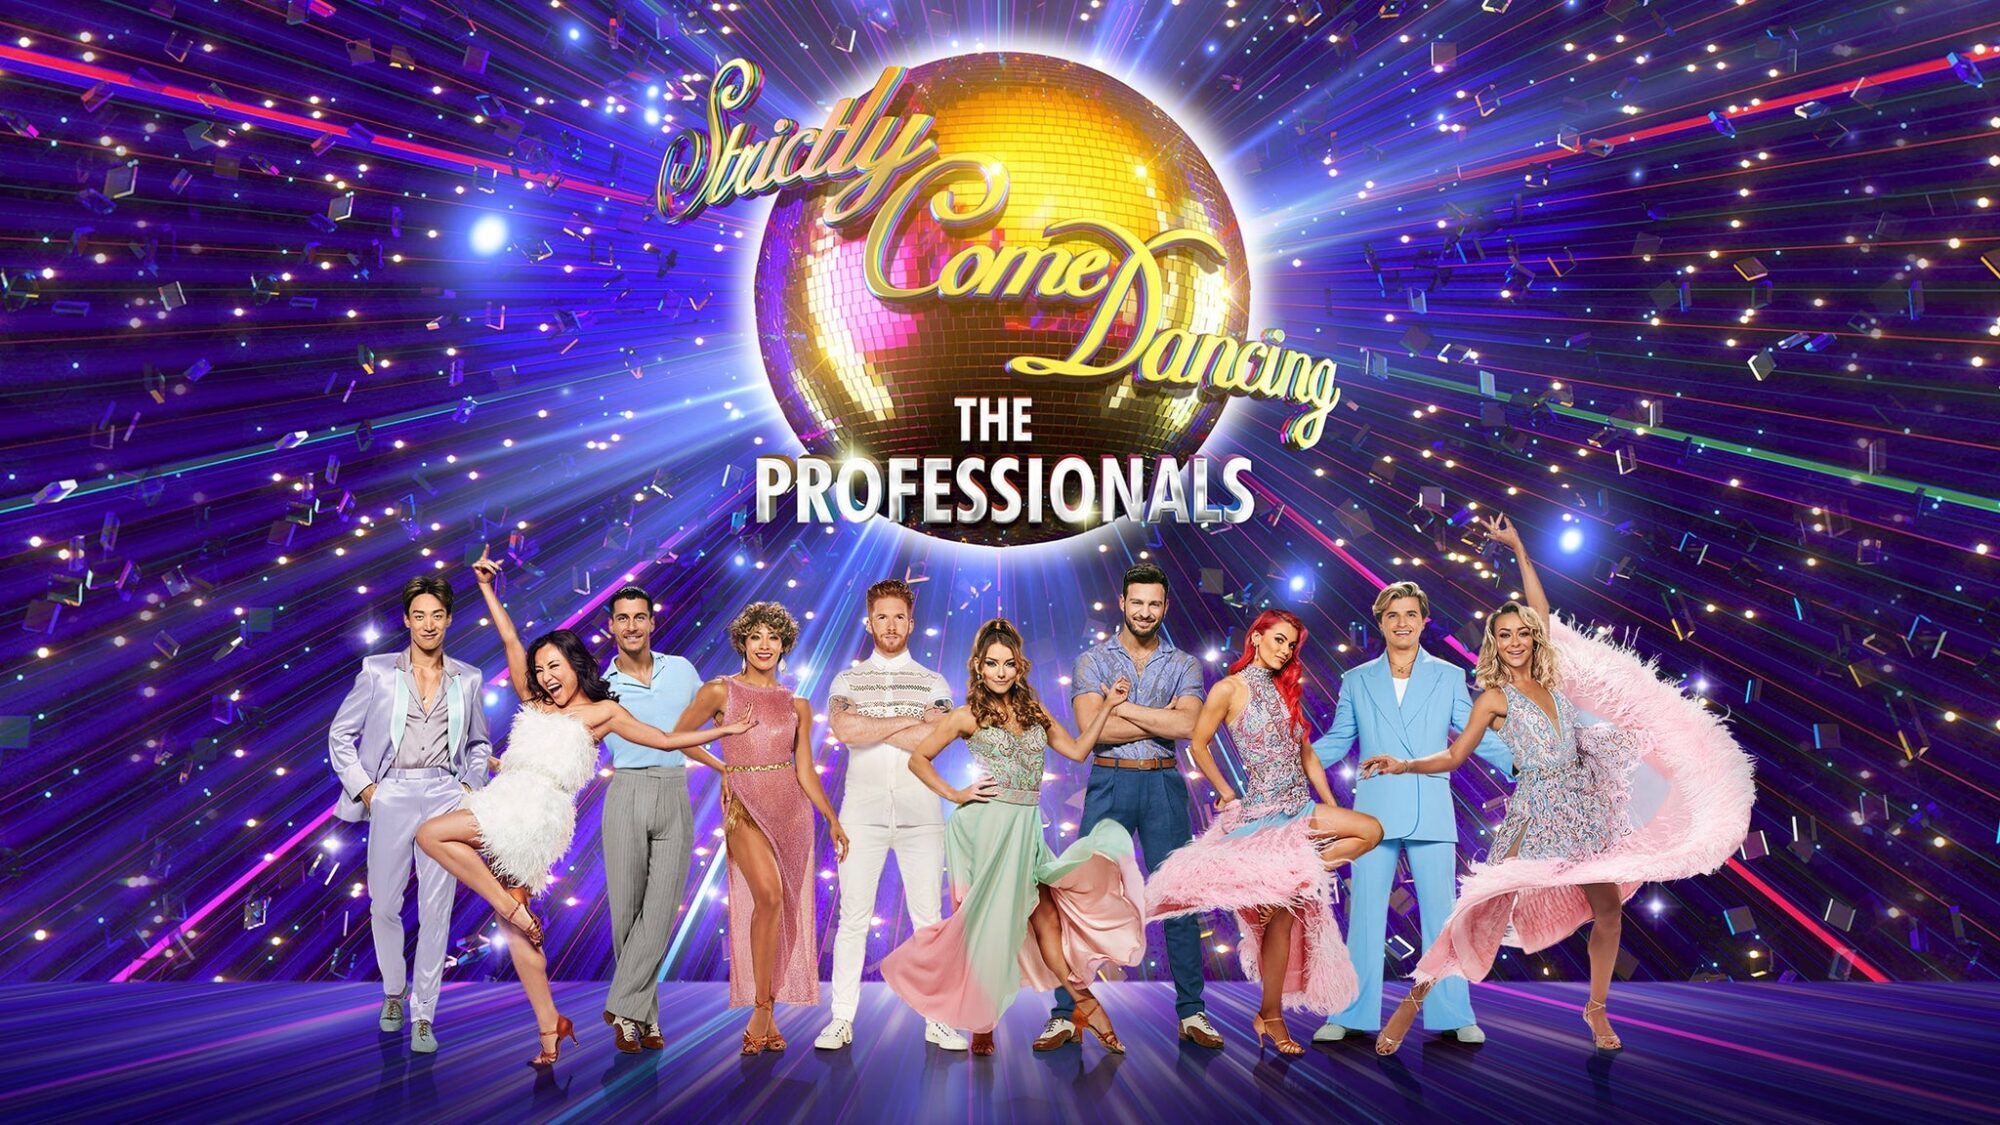 Image name Strictly Come Dancing the Professionals 2023 at Sheffield City Hall Oval Hall Sheffield the 15 image from the post Strictly Come Dancing the Professionals 2023 at Sheffield City Hall Oval Hall, Sheffield in Yorkshire.com.